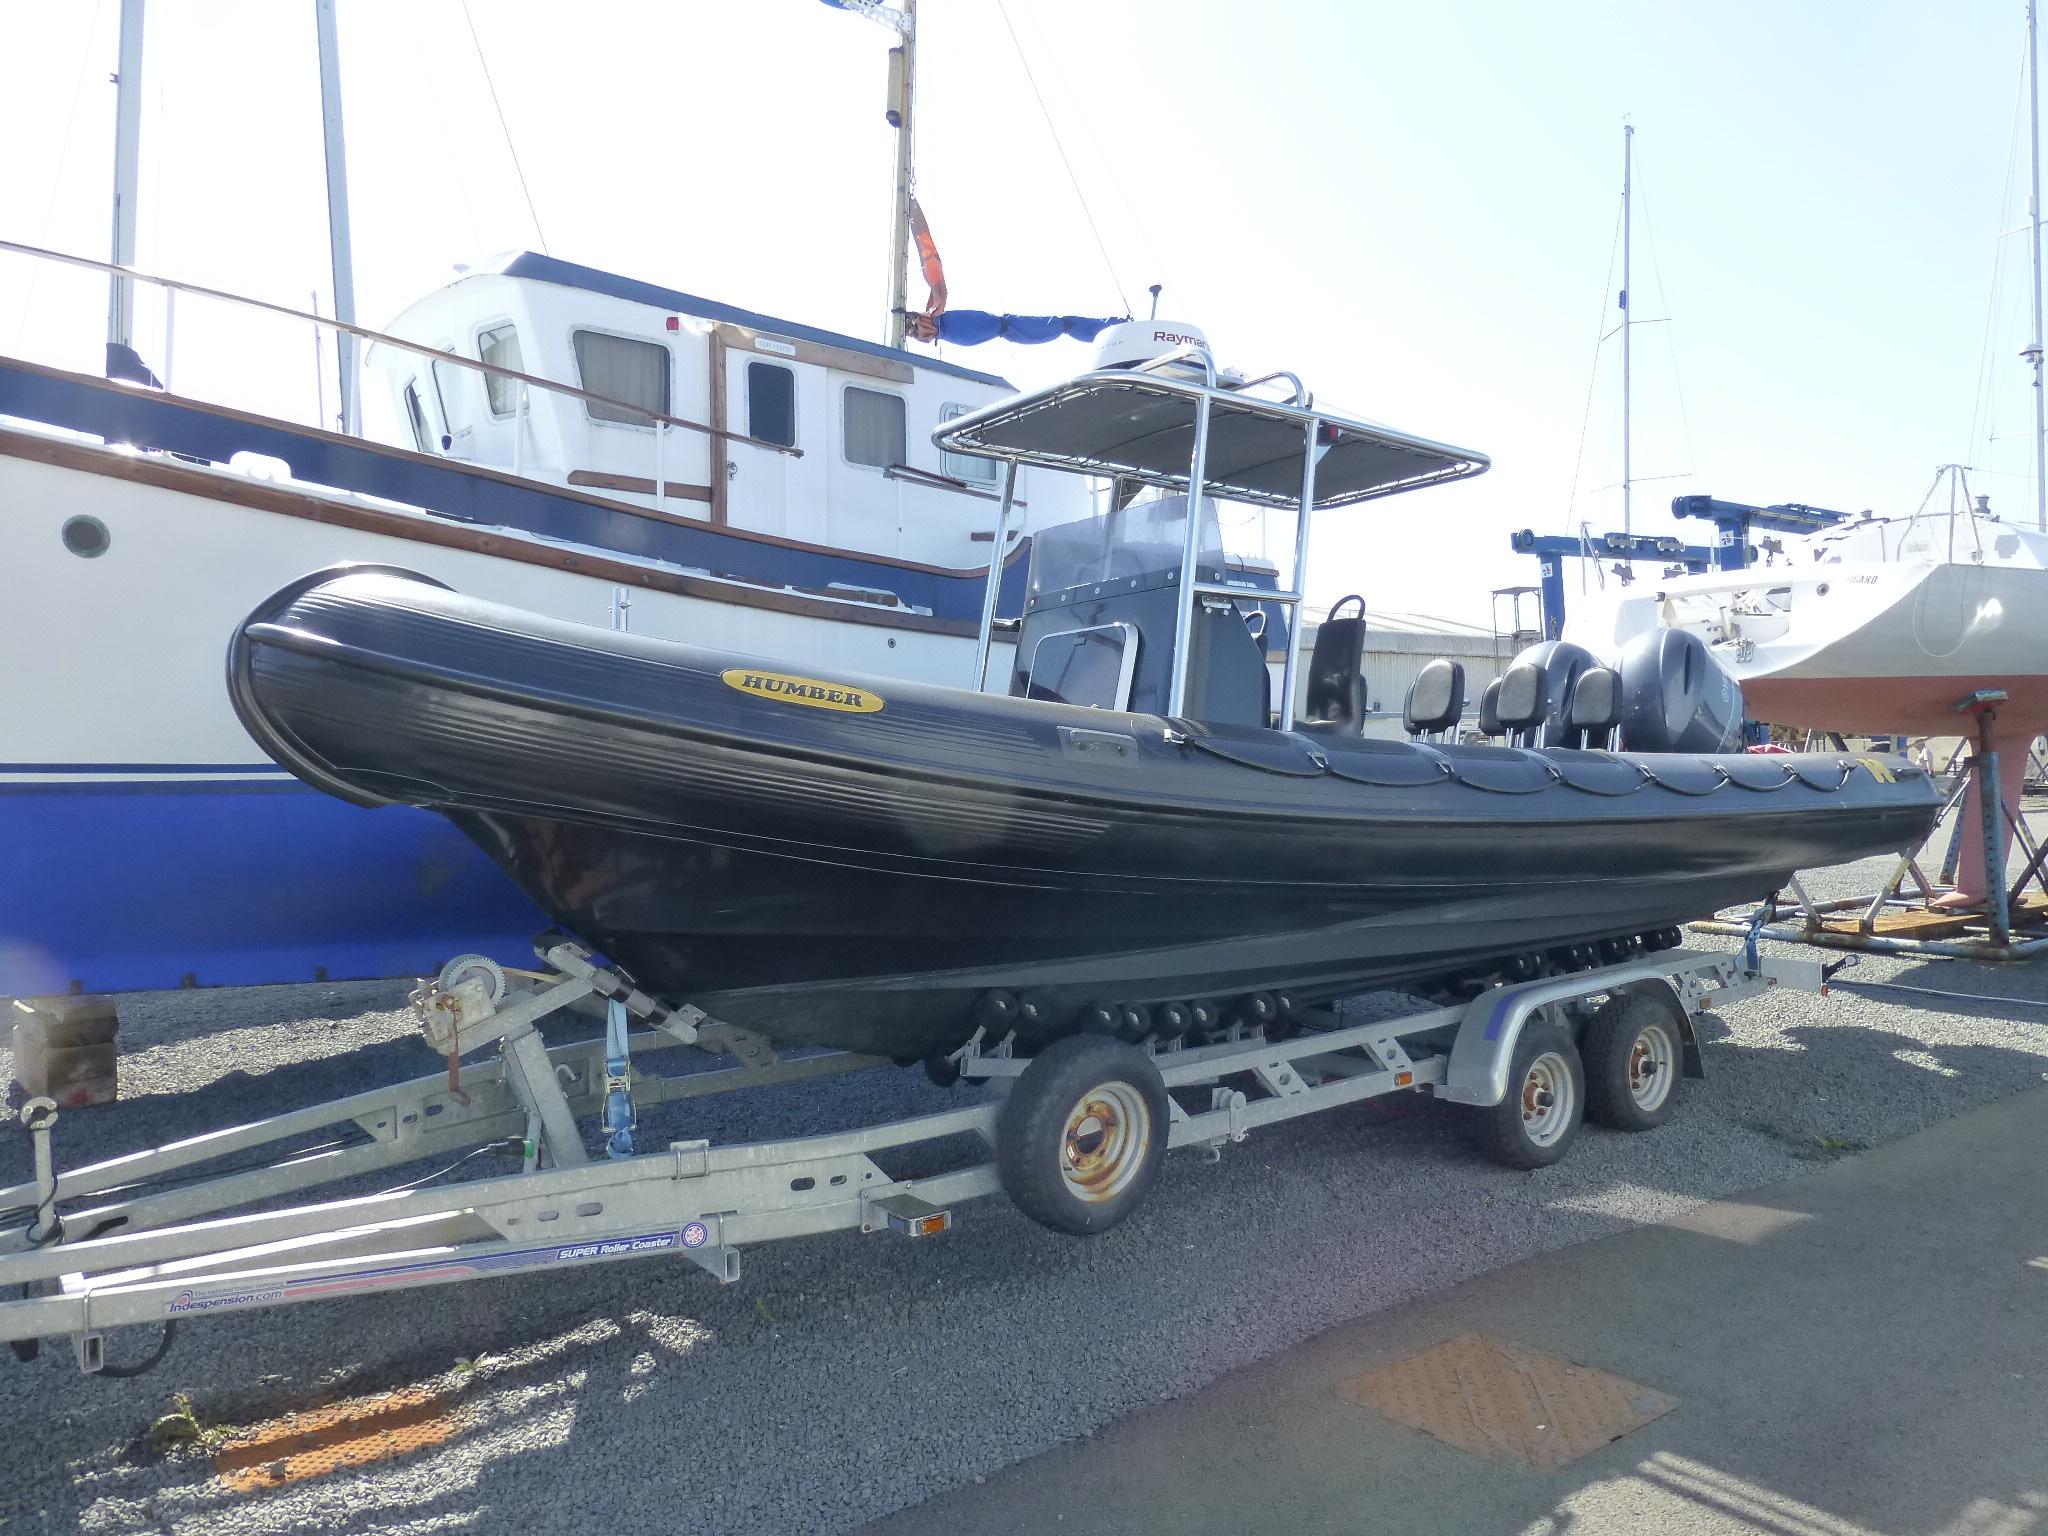 2017 Humber Offshore 8.0 Rigid Inflatable Boats (RIB) for sale